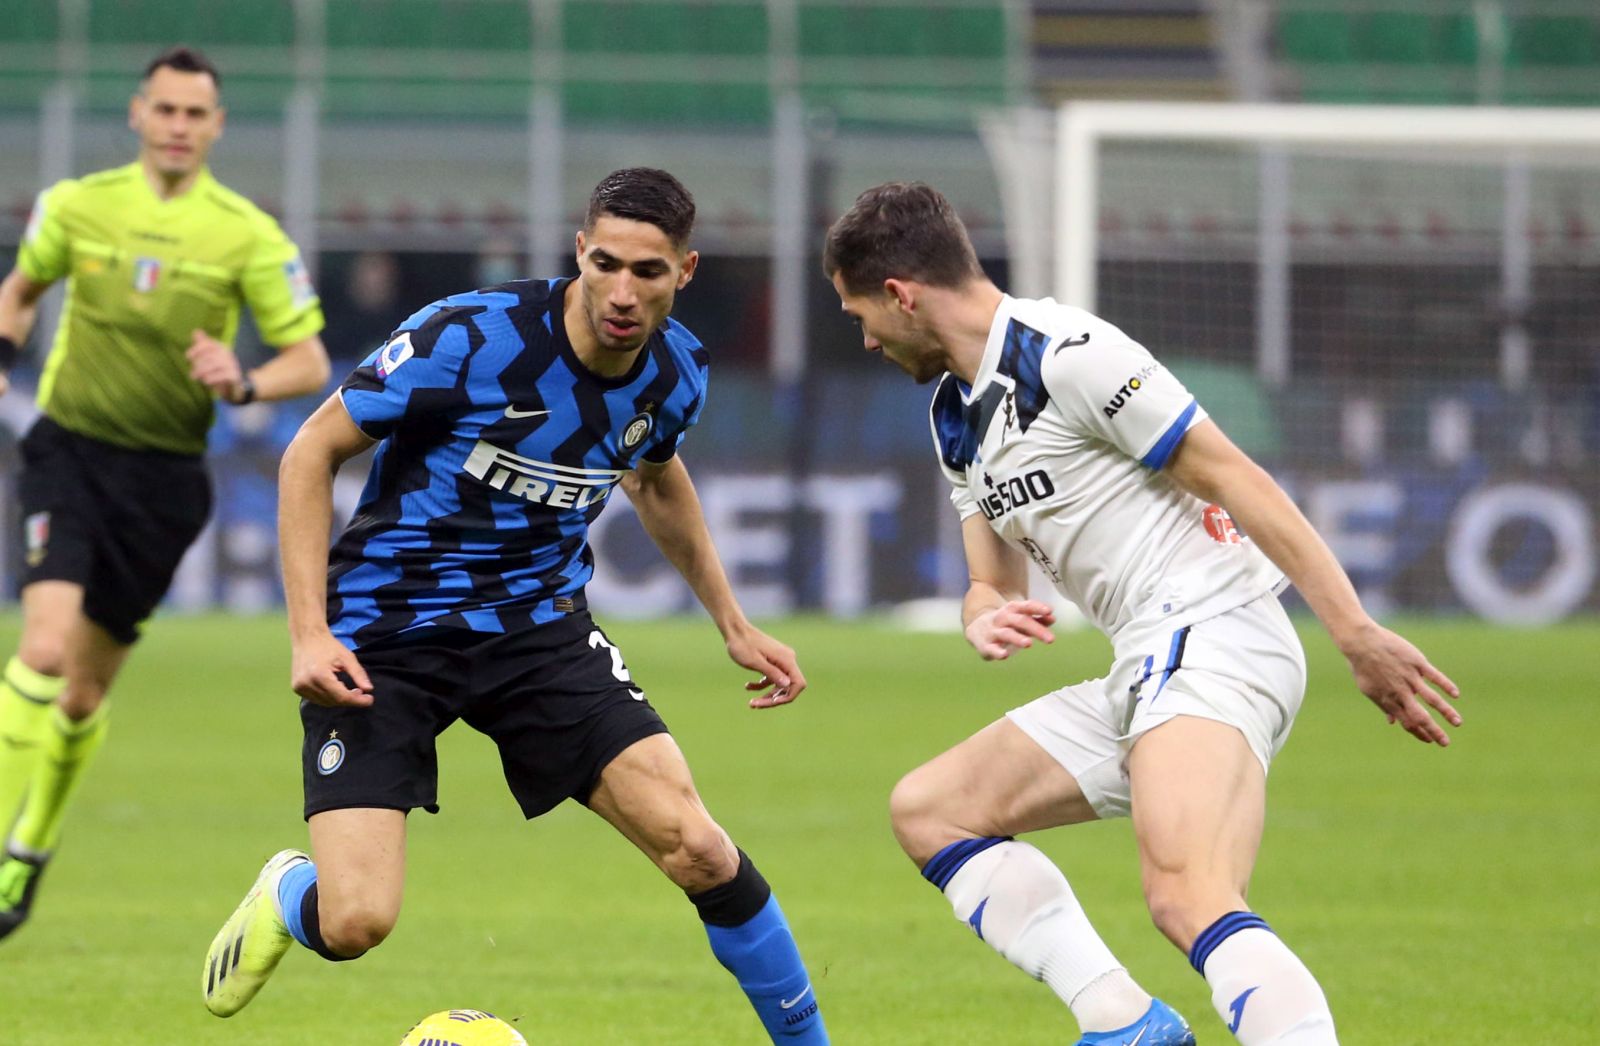 epa09062775 Inter's Achraf Hakimi (L) in action against Atalanta's Remo Freuler (R) during the Italian Serie A soccer match between Inter Milan and Atalanta Bergamo at Giuseppe Meazza stadium in Milan, Italy, 08 March 2021.  EPA/MATTEO BAZZI